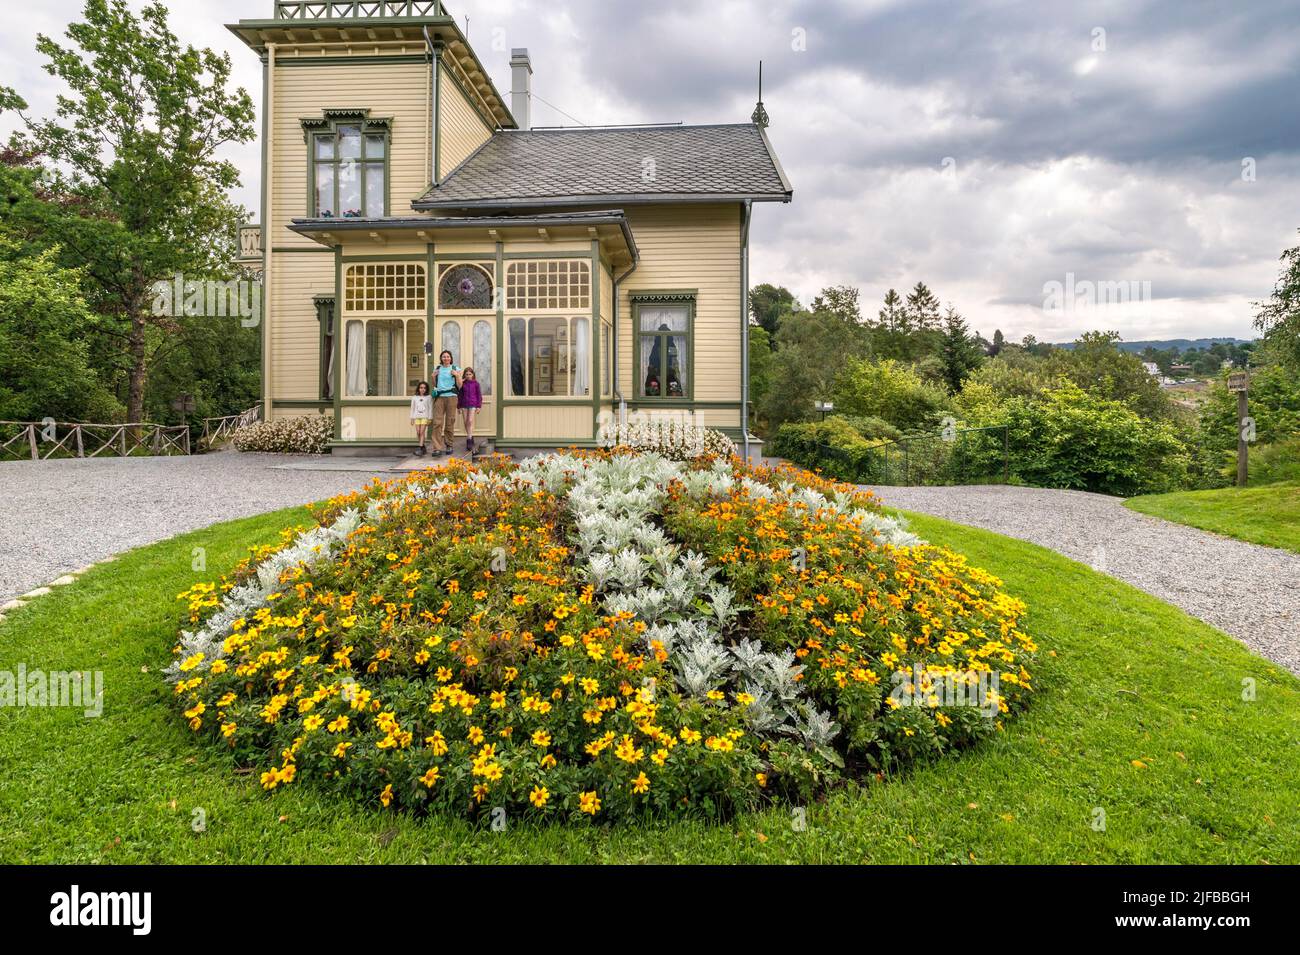 Norway, County of Hordaland, Bergen, in Troldhaugen, the home of the composer Edvard GRIEG (1843-1907), in the garden Stock Photo